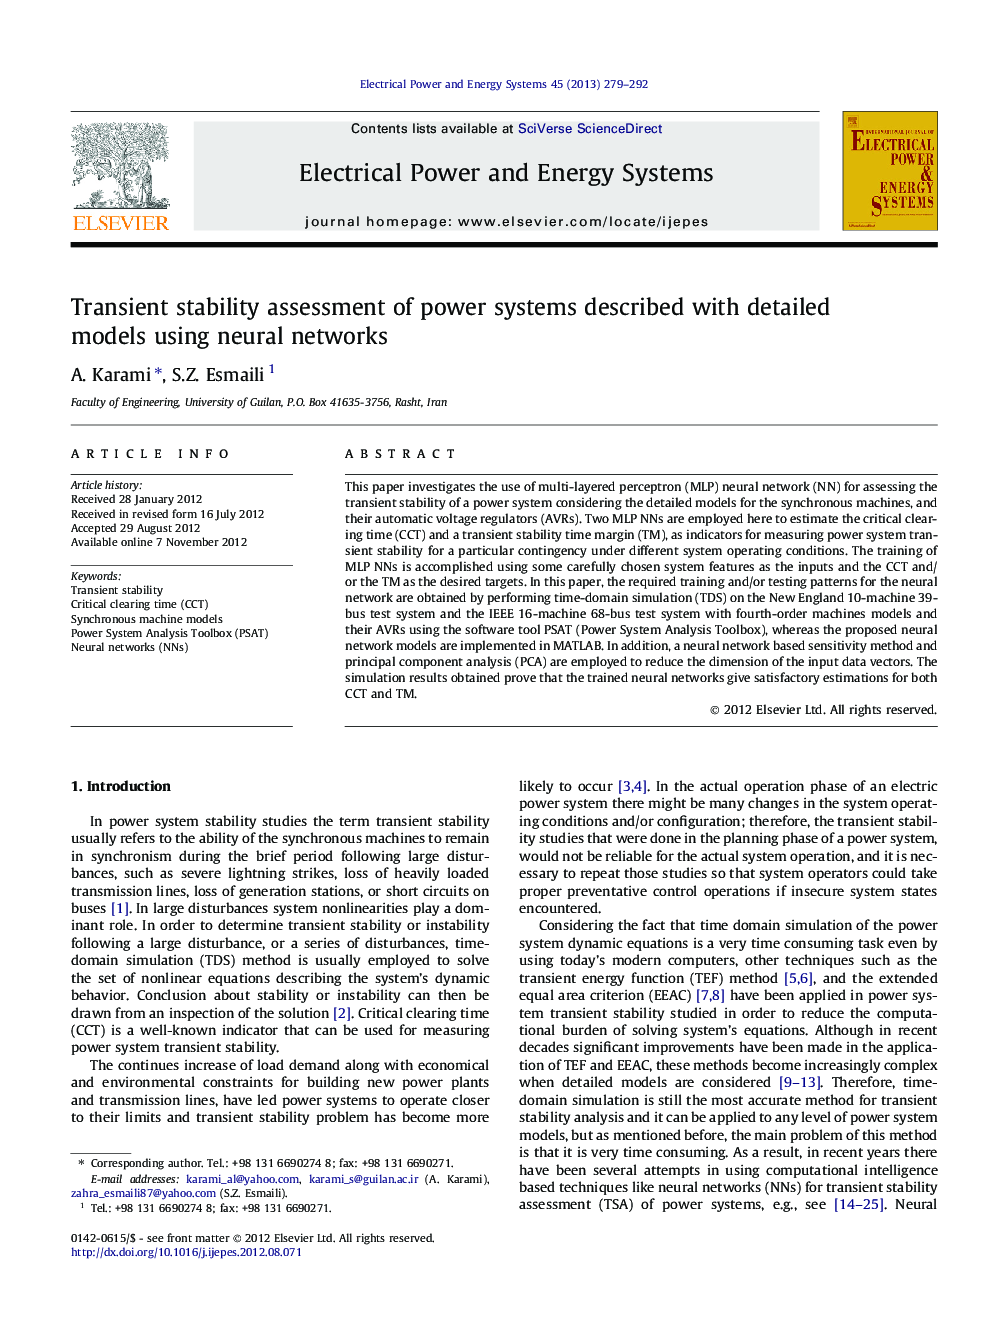 Transient stability assessment of power systems described with detailed models using neural networks